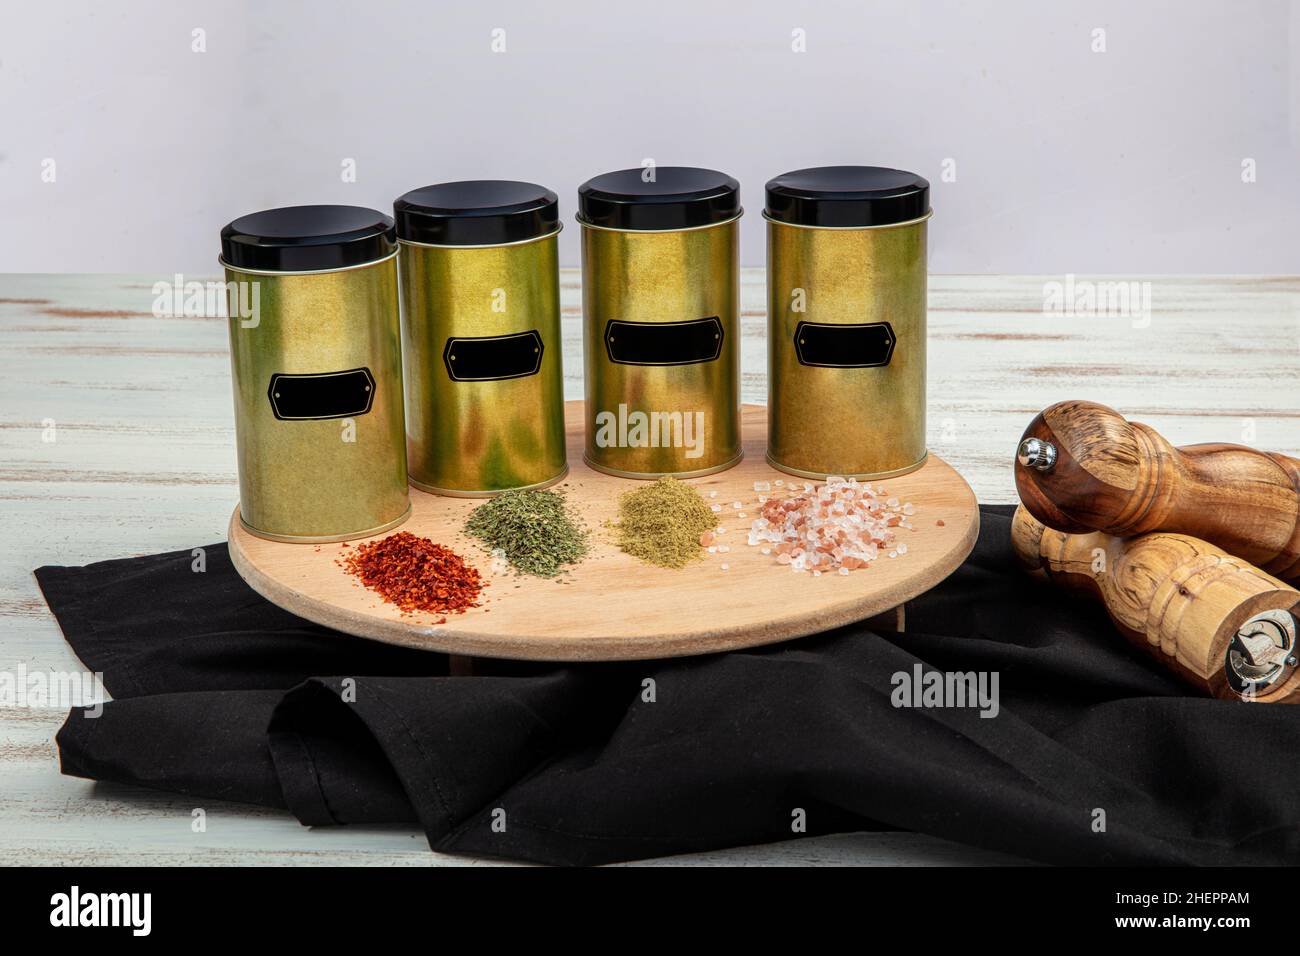 https://c8.alamy.com/comp/2HEPPAM/spices-on-a-pantry-shelf-spices-in-tin-cans-2HEPPAM.jpg